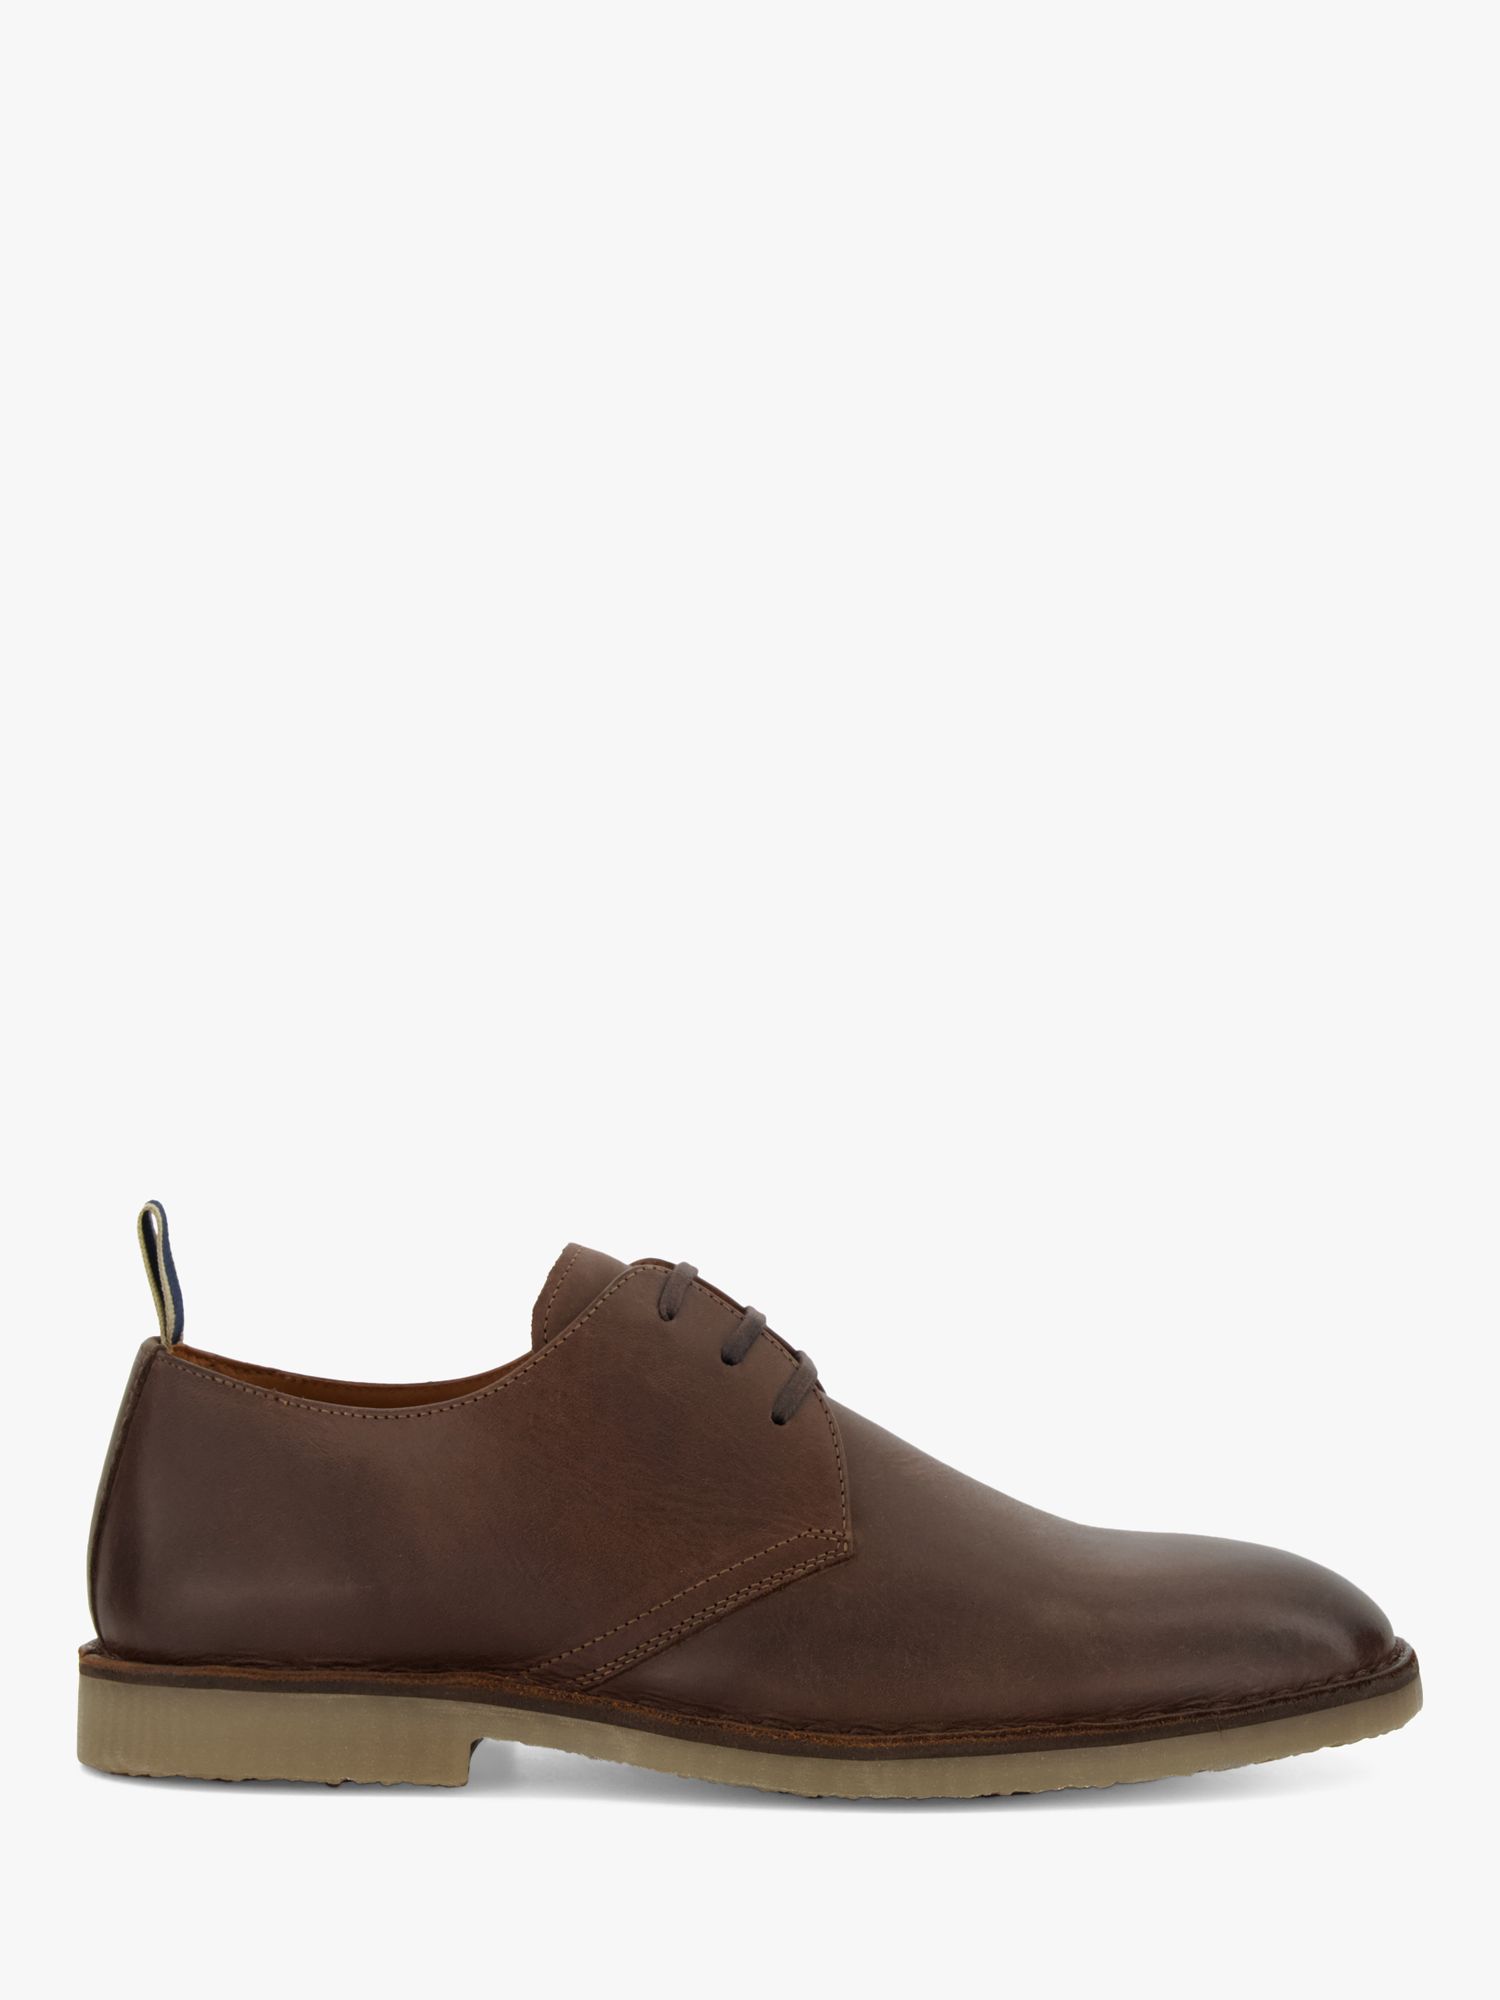 Buy Dune Brooked Leather Chukka Shoes Online at johnlewis.com